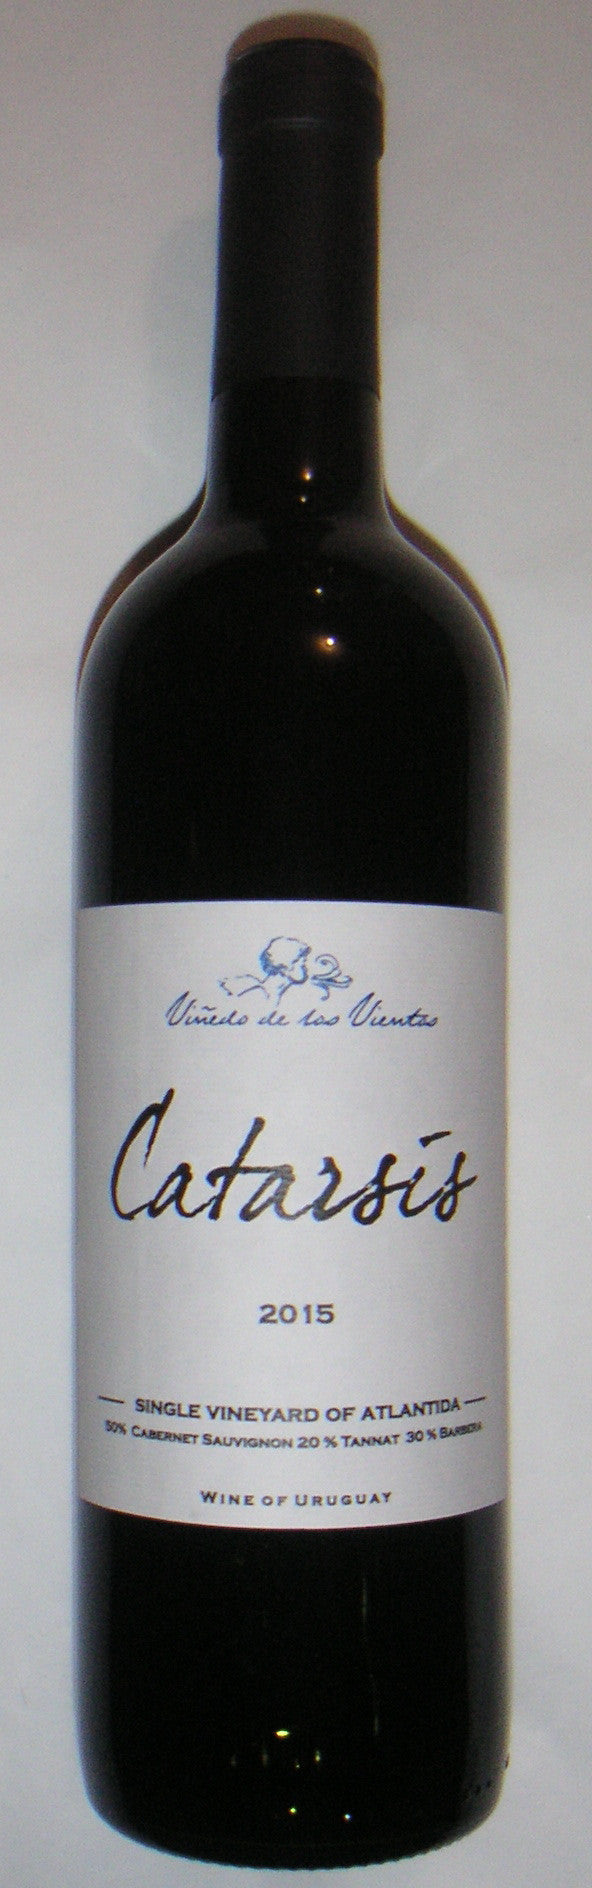 Catarsis Red 2015 Uruguay, 75cl